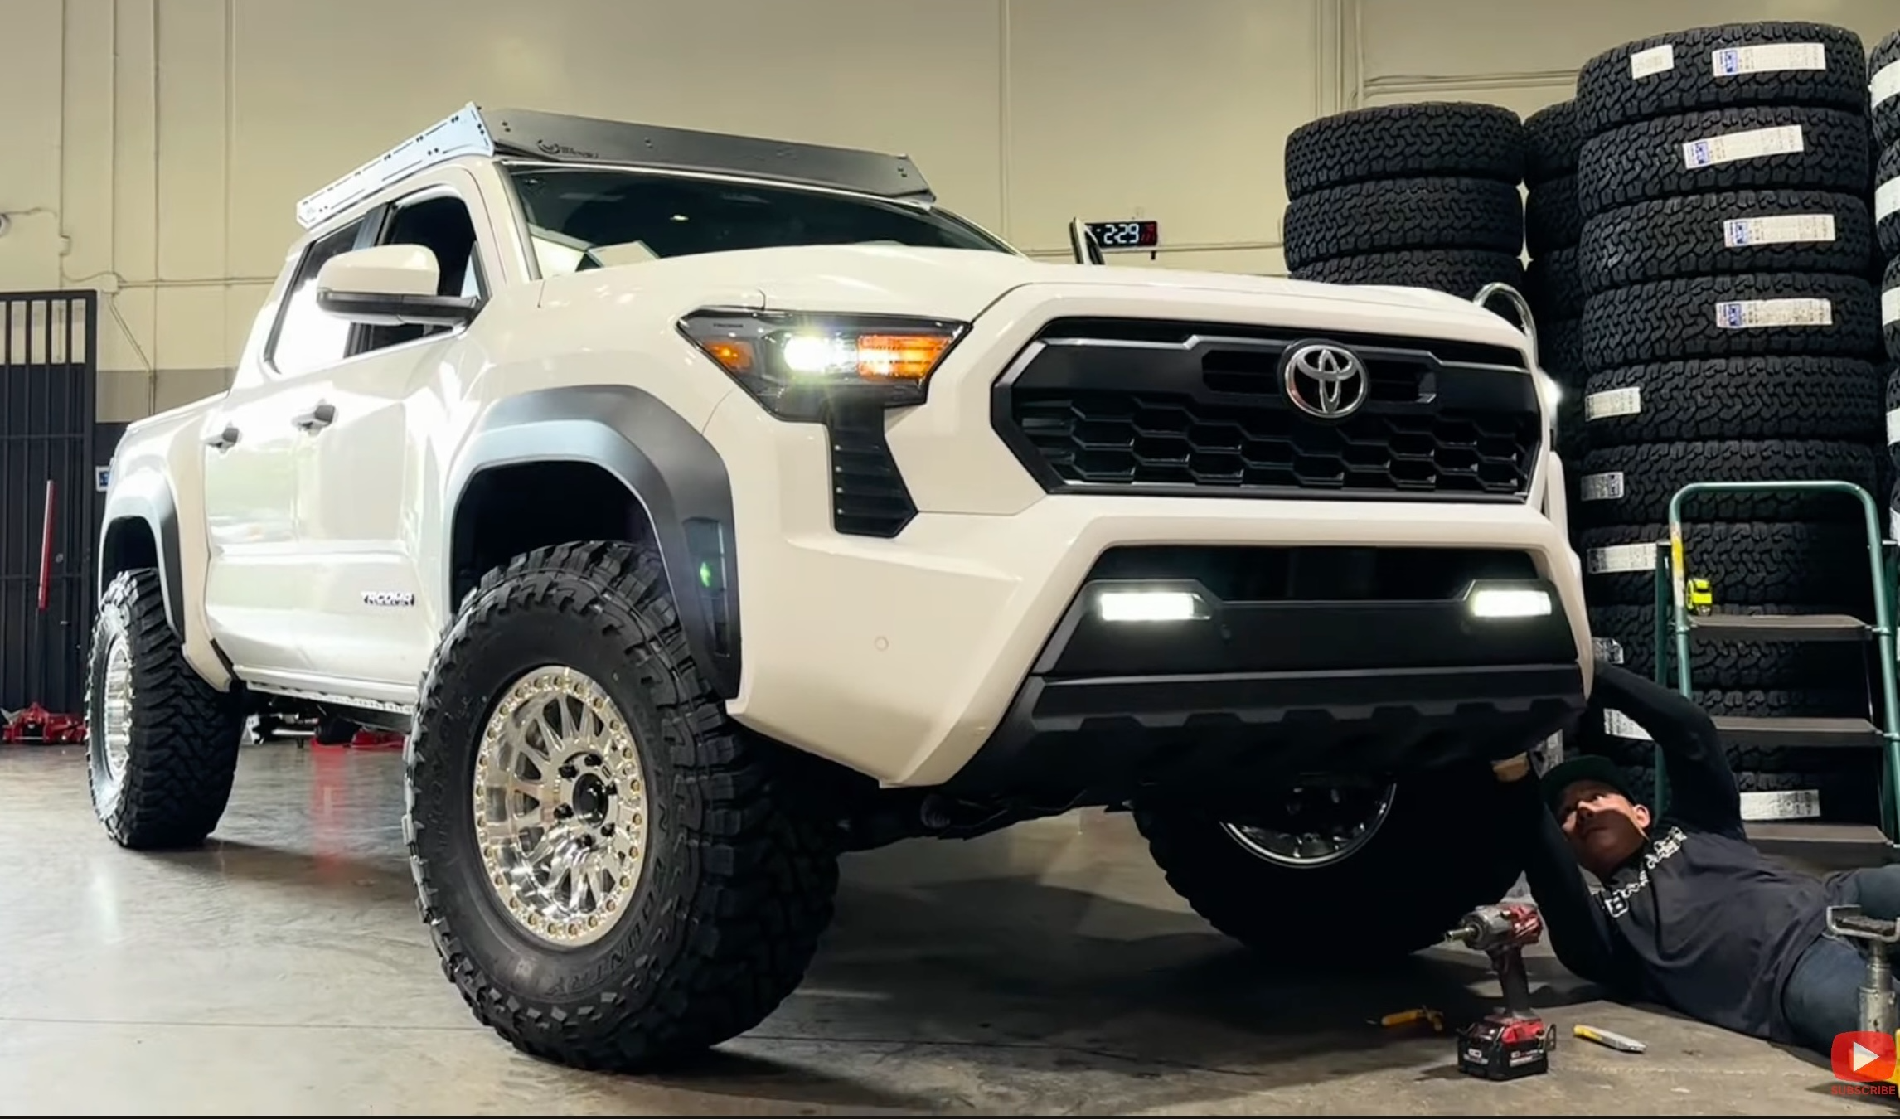 2024 Tacoma Official ICE CAP 2024 Tacoma Thread (4th Gen) BUILD 2024 Tacoma TRD Offroad on Spacer Lift Kit, Beadlock Wheels, 35%22 Tires, & Prinsu Pro R